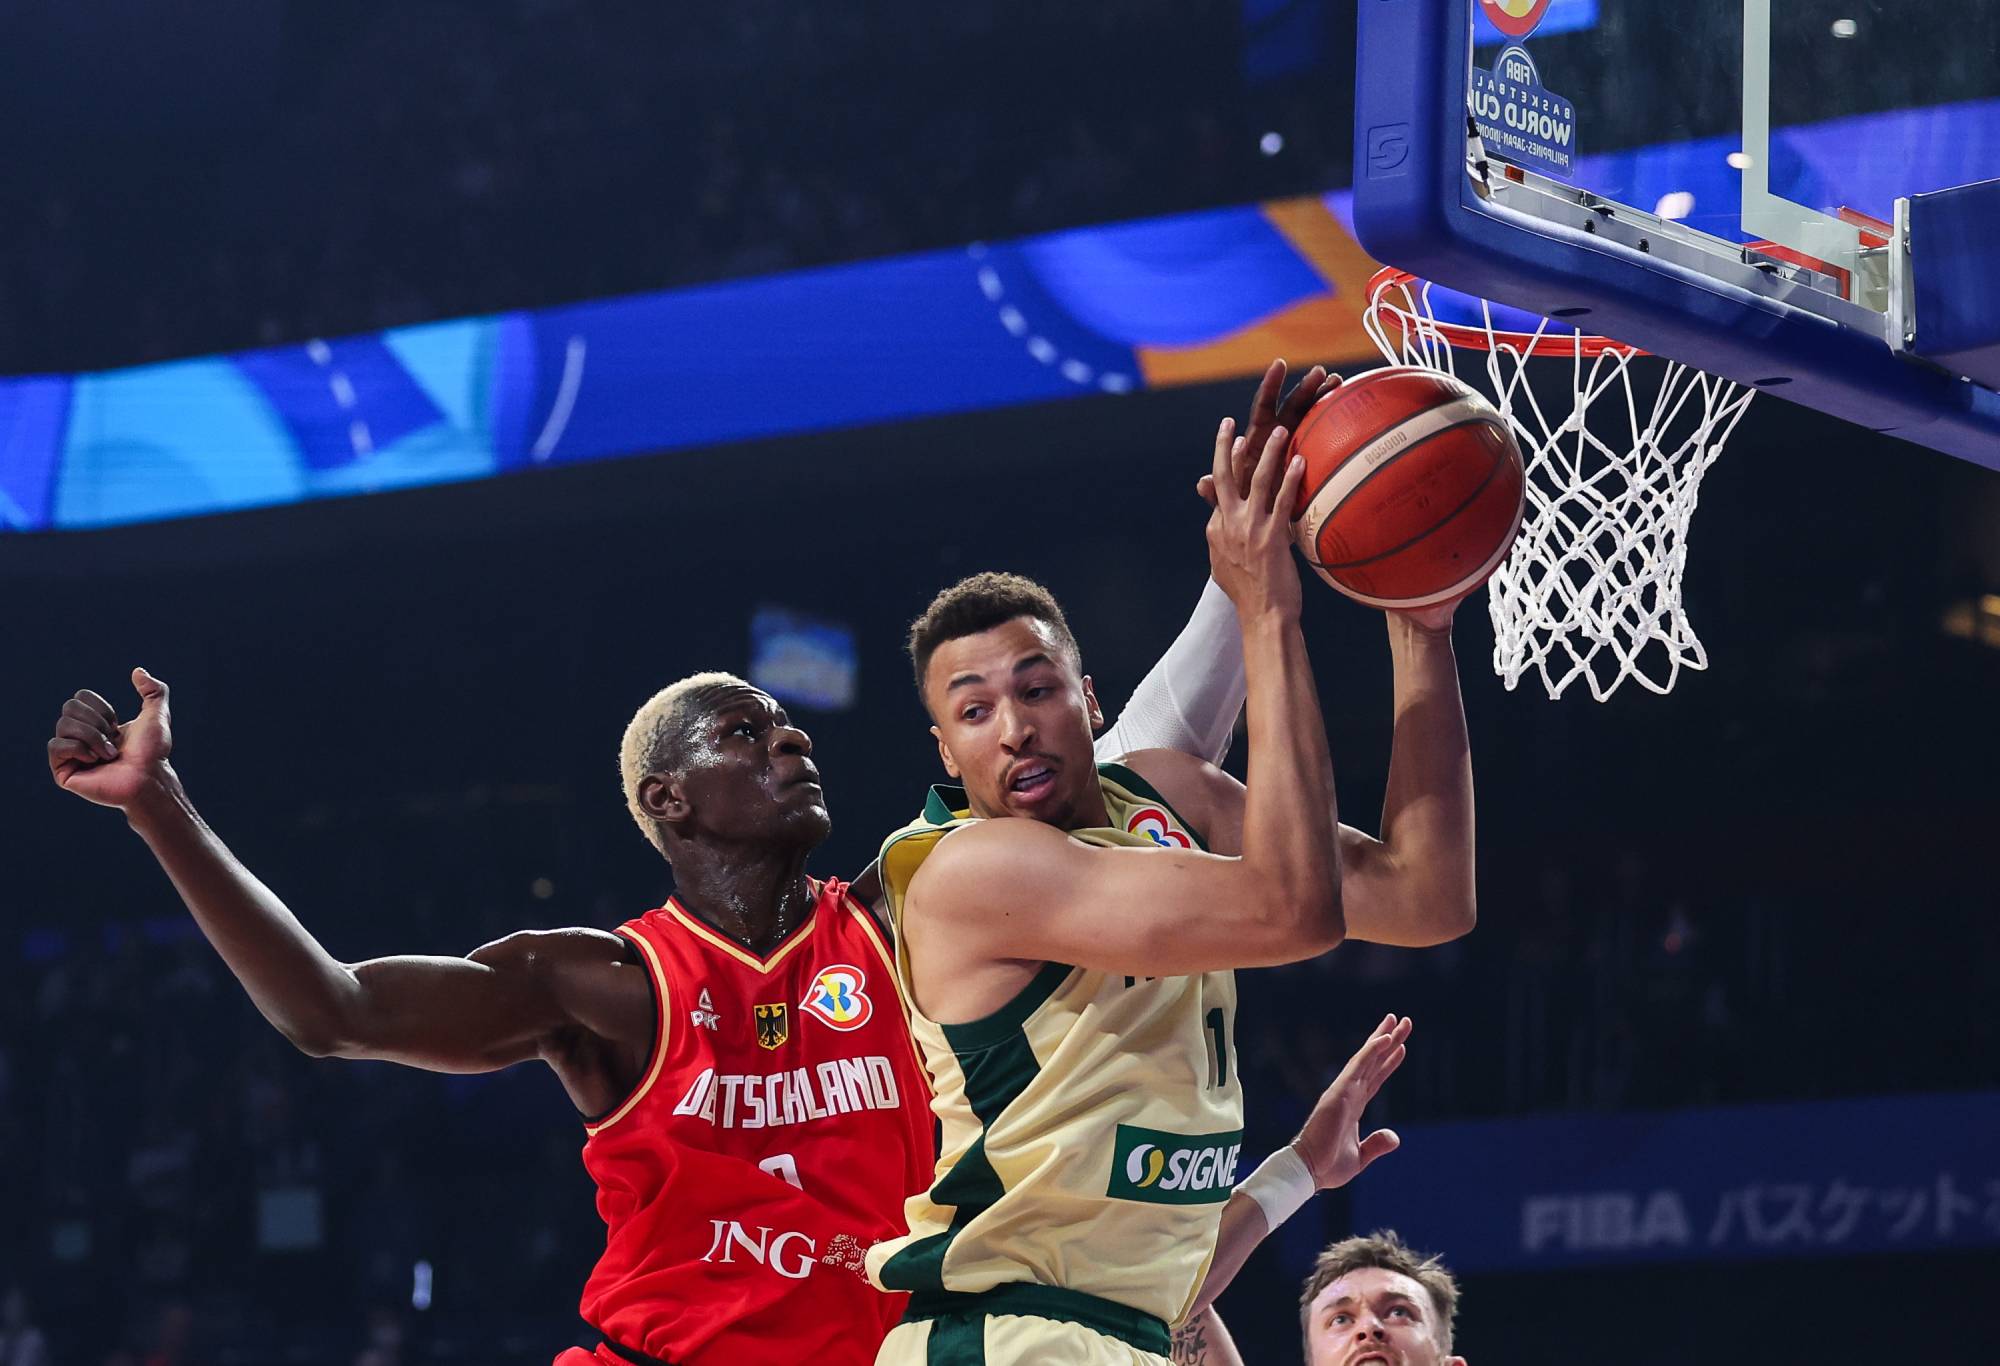 OKINAWA, JAPAN - AUGUST 27: Dante Exum #11 of Australia contest a rebound with Isaac Bonga #0 of Germany during the FIBA Basketball World Cup Group E game between Australia and Germany at Okinawa Arena on August 27, 2023 in Okinawa, Japan. (Photo by Takashi Aoyama/Getty Images)